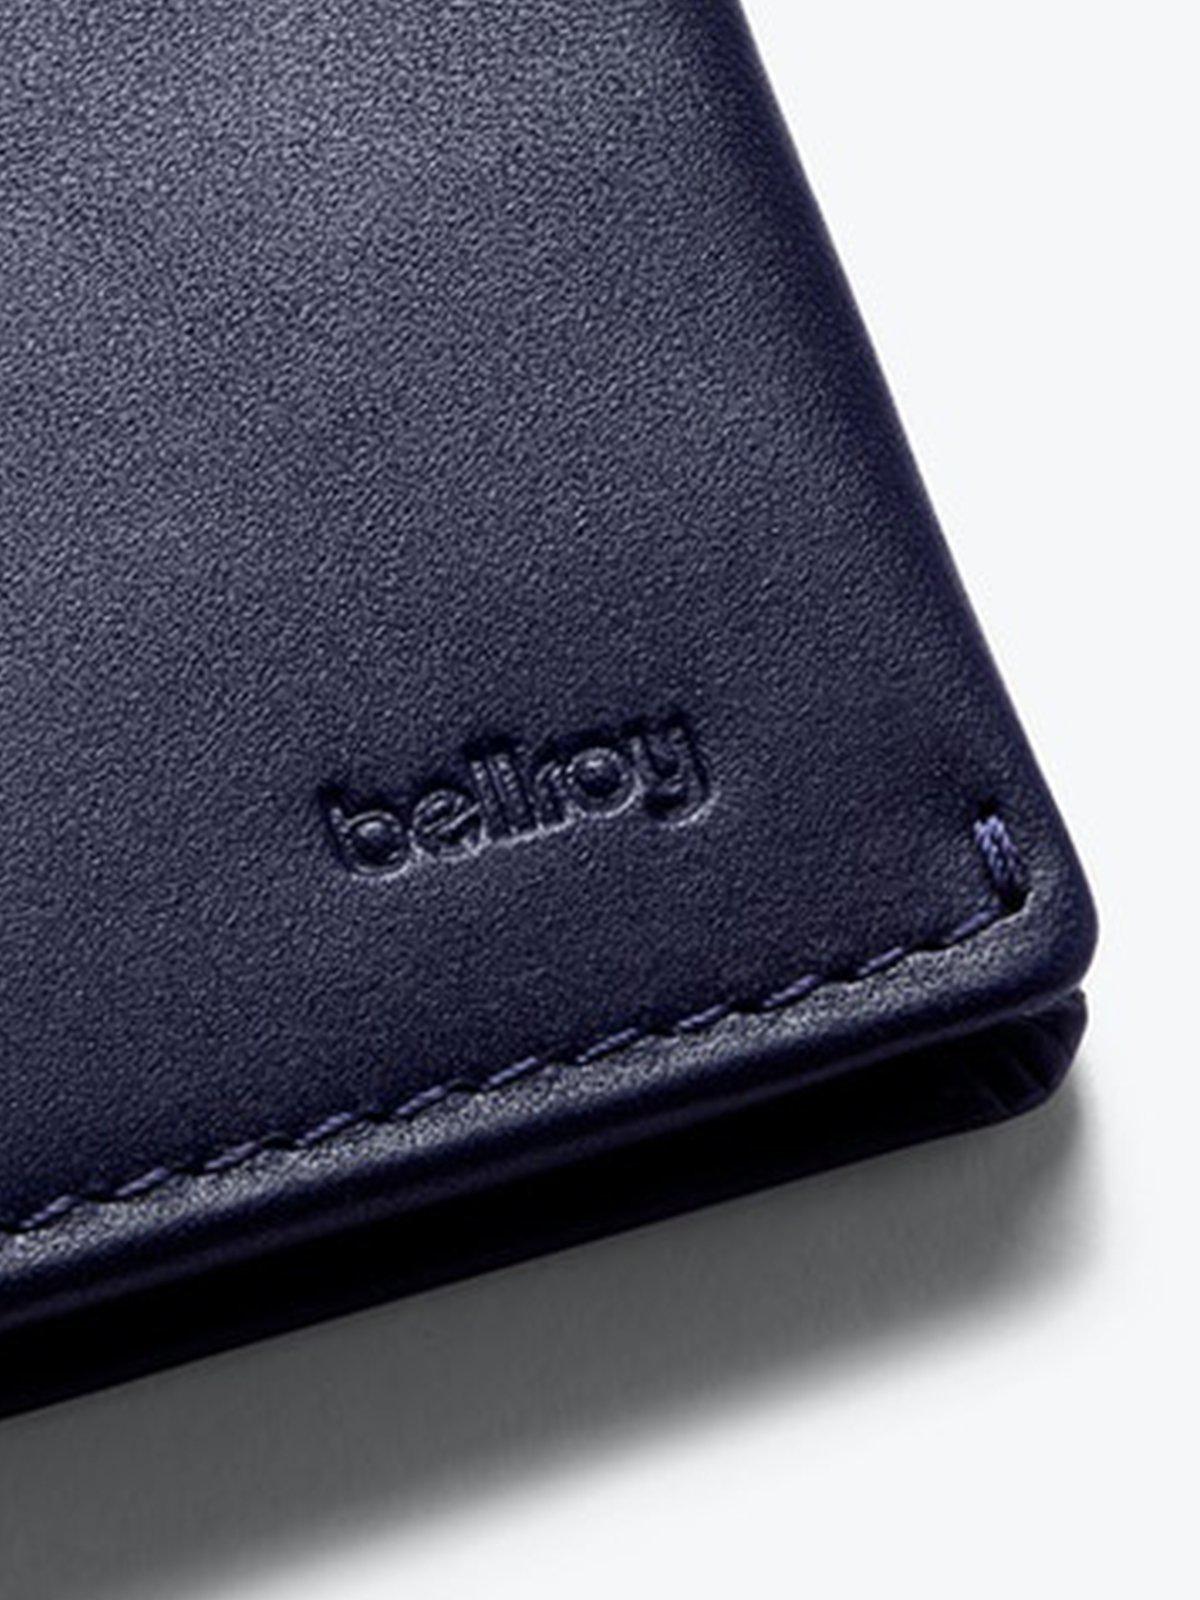 Bellroy Slim Sleeve Wallet Navy - MORE by Morello Indonesia